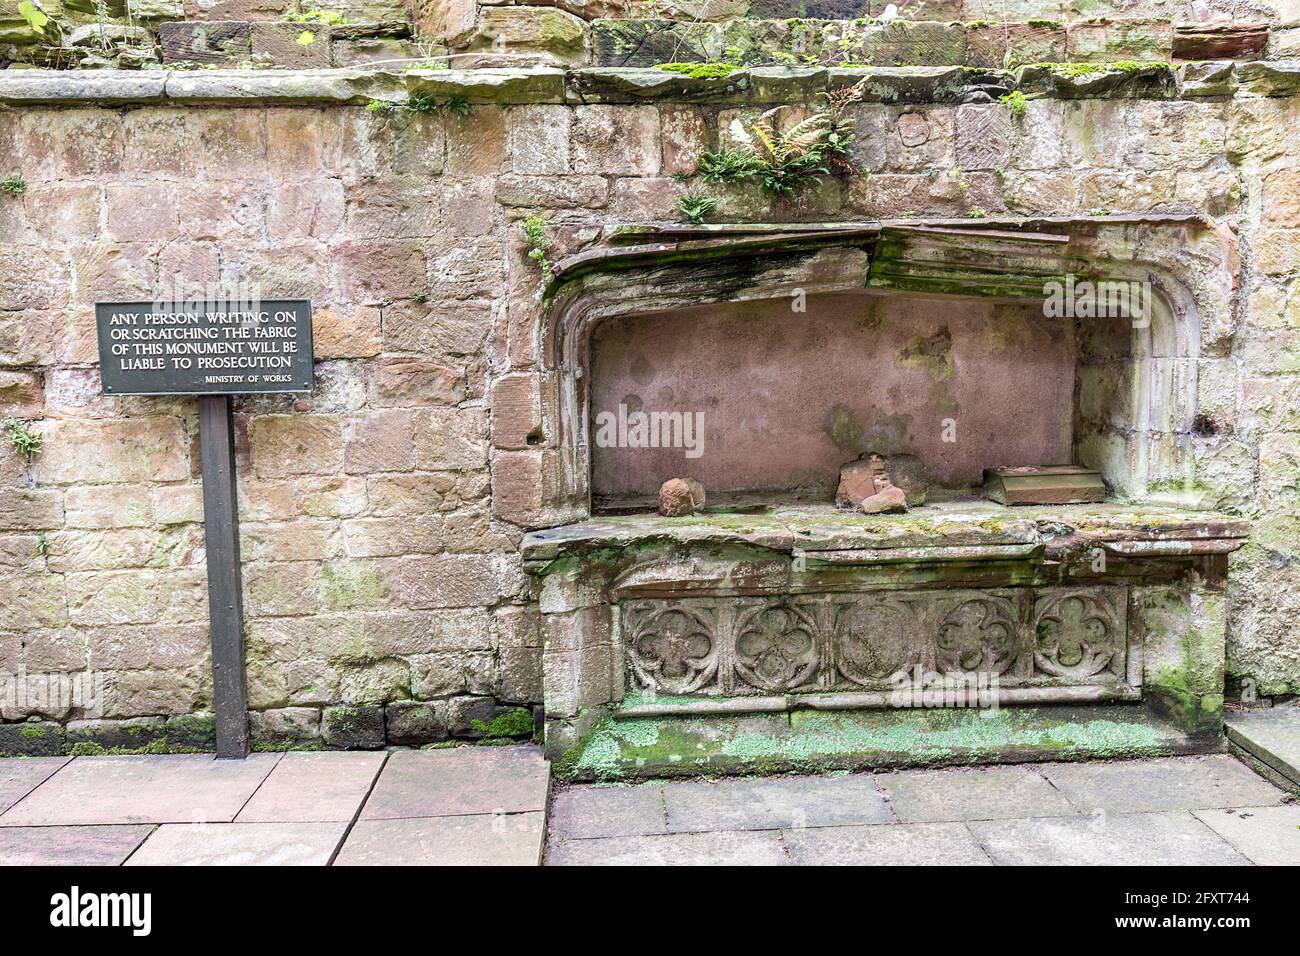 Warning sign about writing on walls of scheduled monument, Lanercost Priory, Cumbria, England, UK Stock Photo